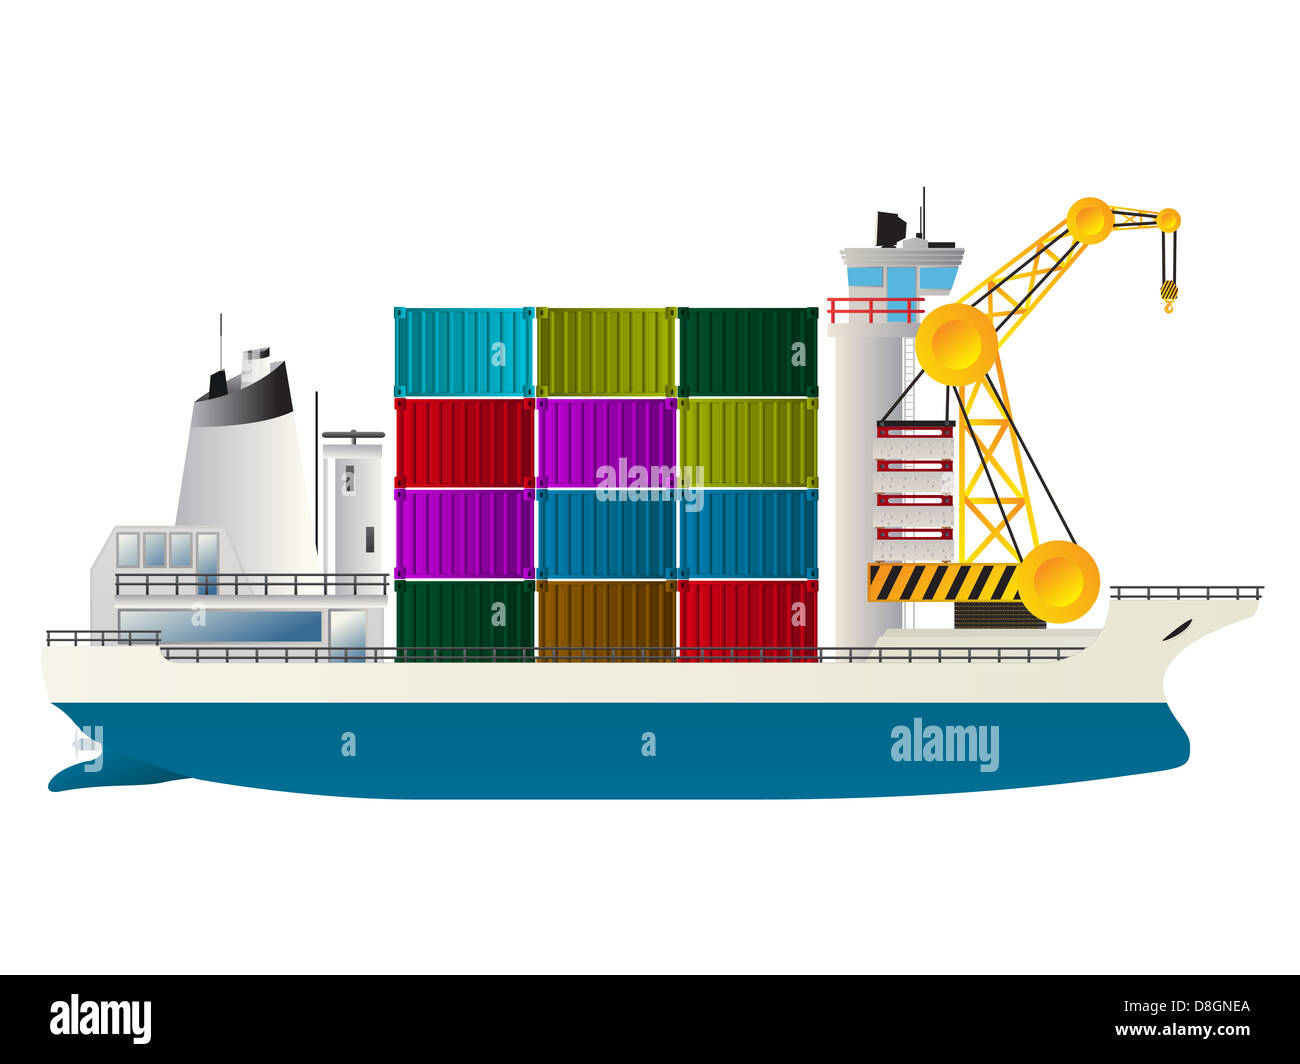 Container ship Stock Photo